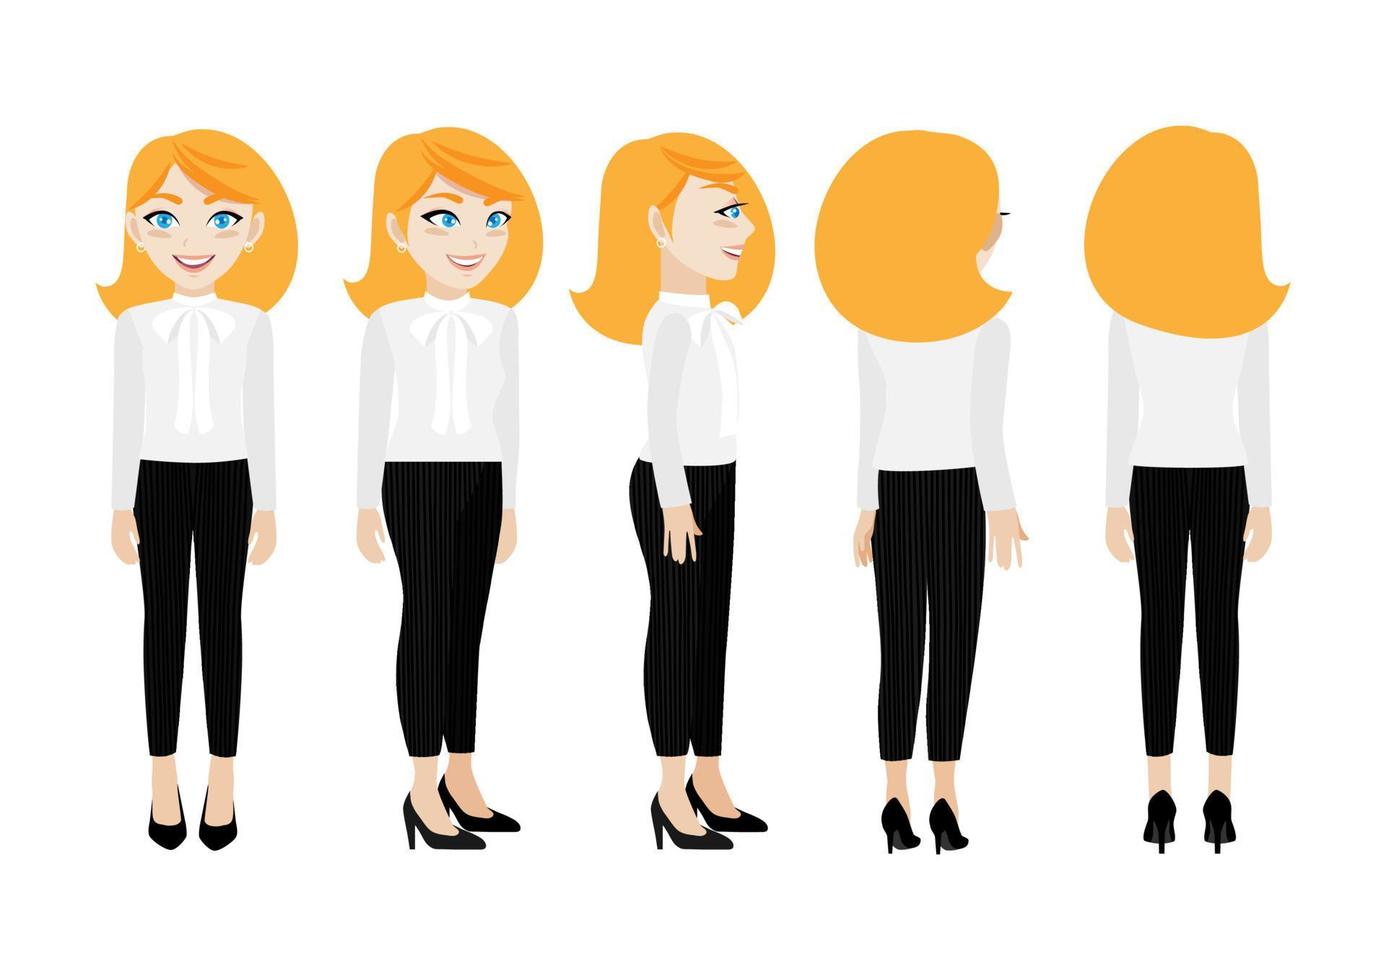 Cartoon character with business woman. Front, side, back, 3-4 view animated character. Flat vector illustration.